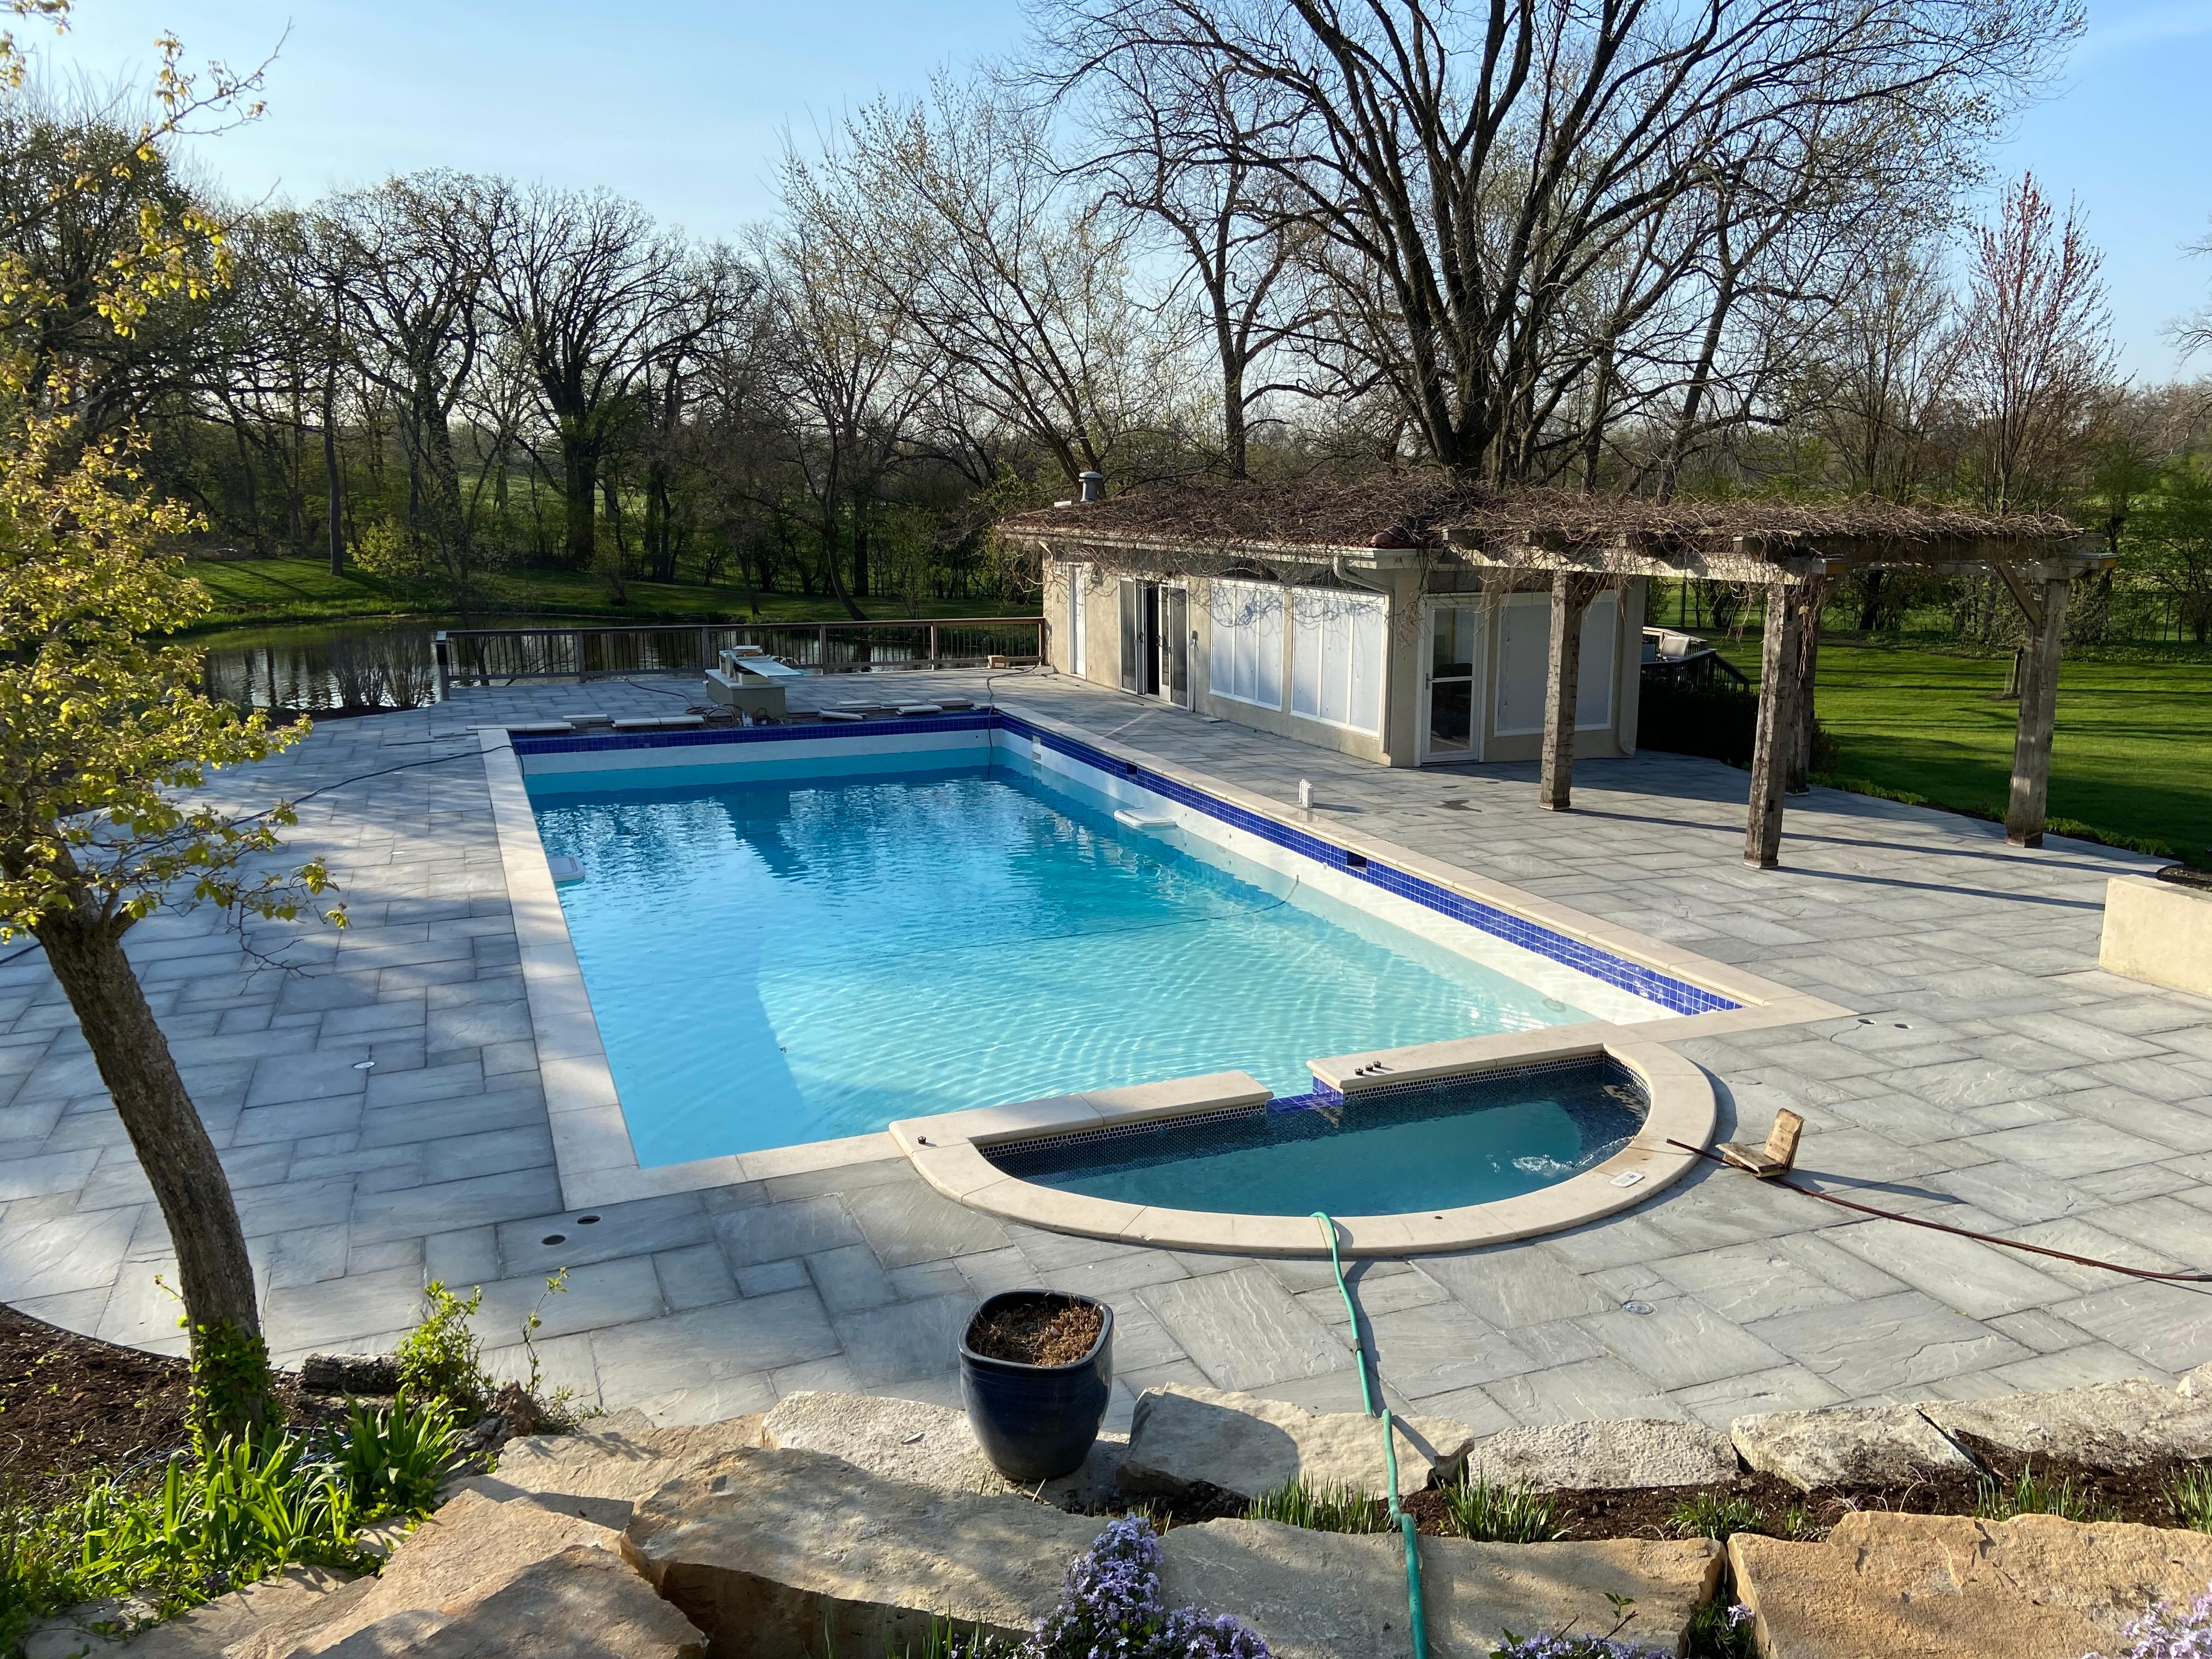 The Swimming Pool Terminology All Pool Owners Must Know